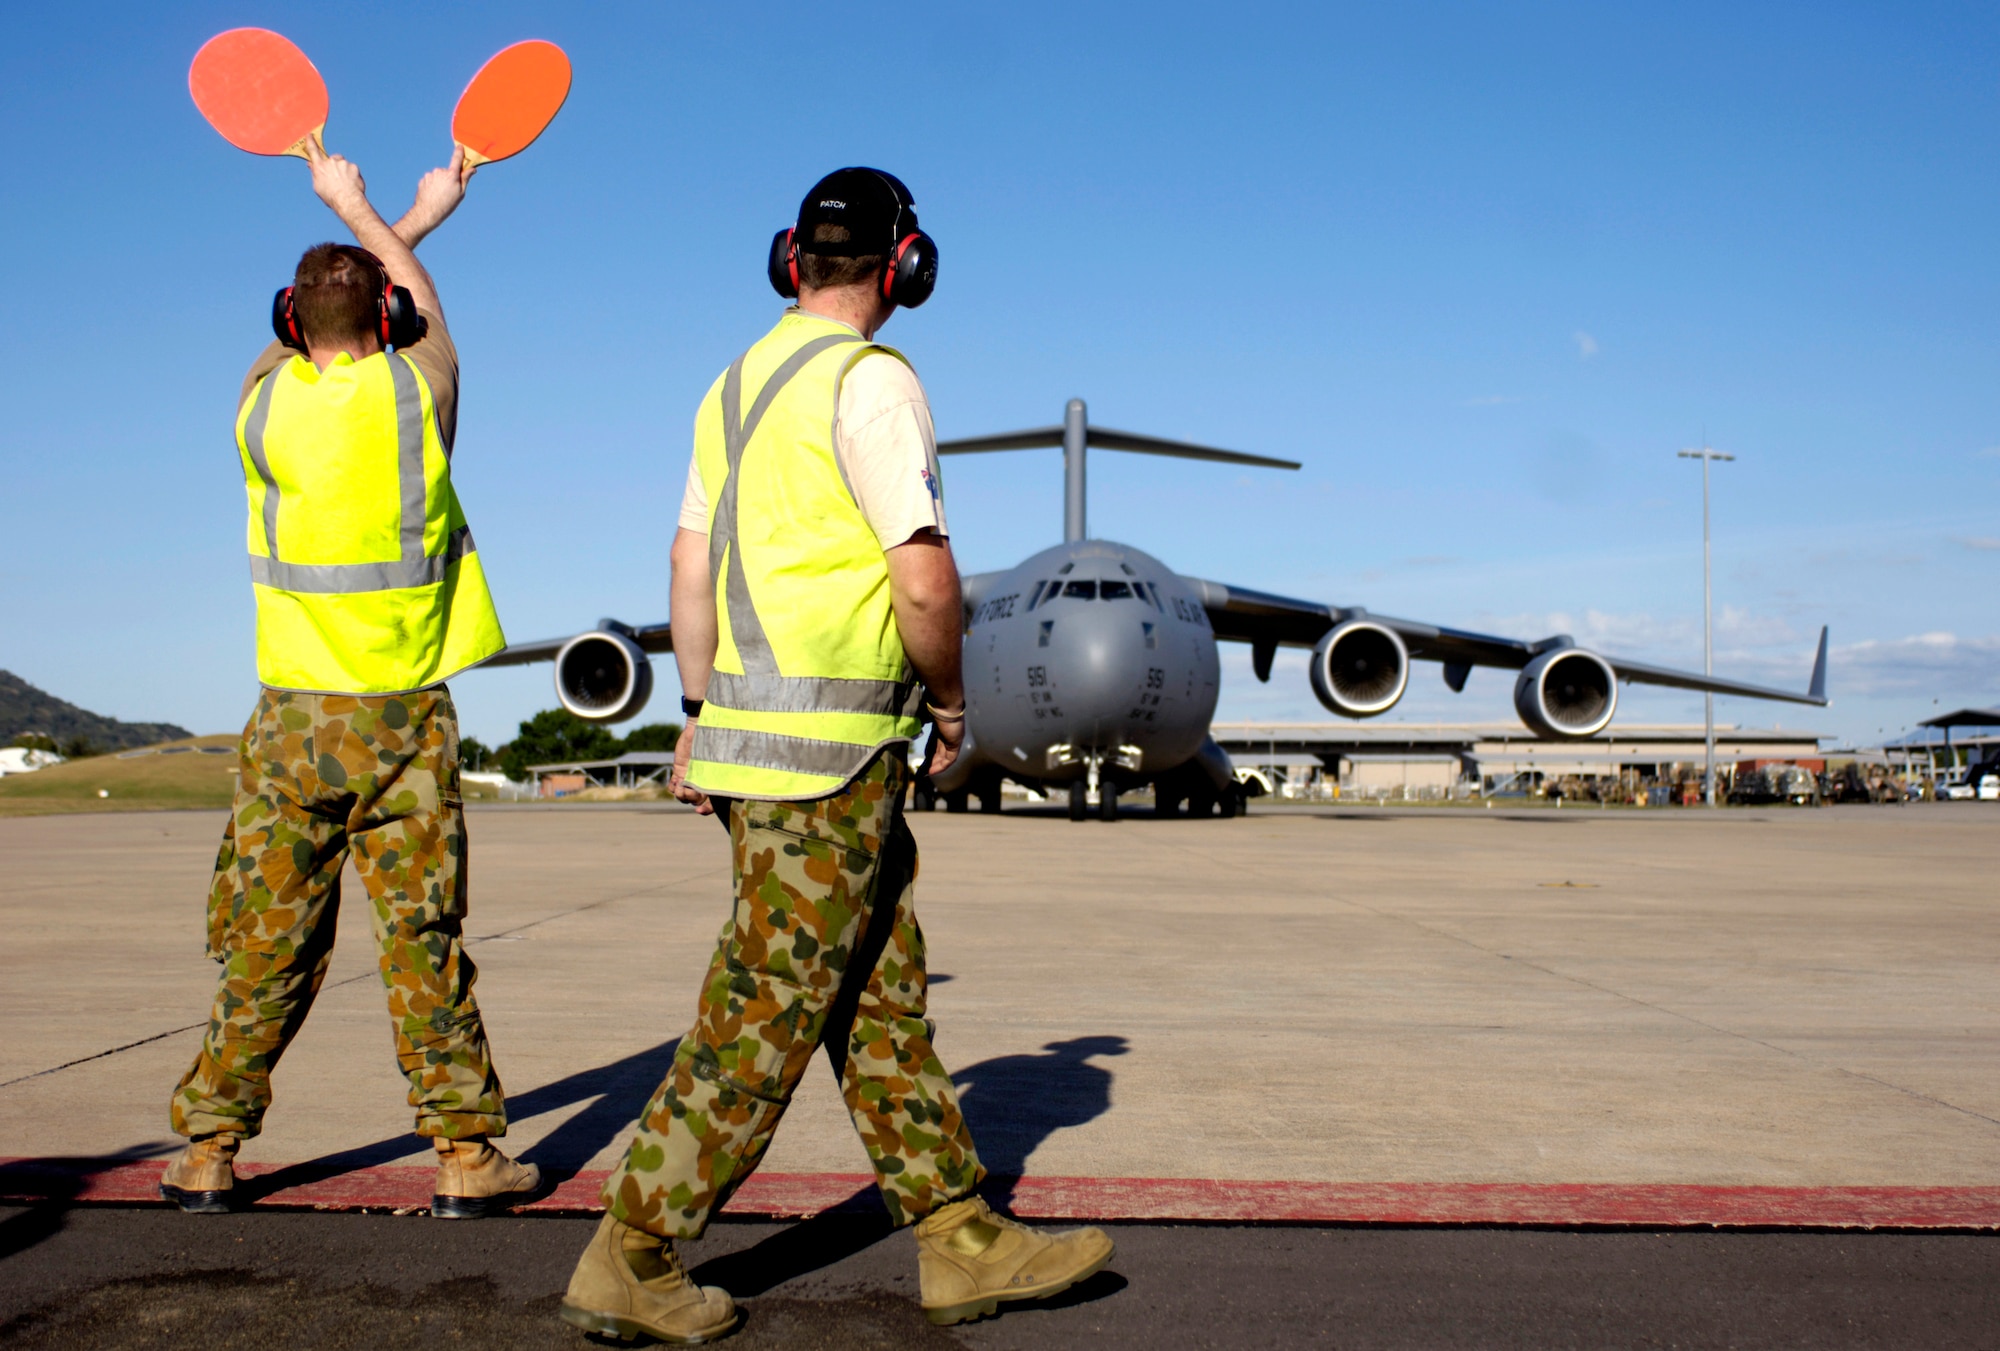 Members of the Australian Air Force marshal a C-17 Globemaster III into a parking spot at Royal Australian Air Force Base Townsville, Australia, on Tuesday, May 30, 2006. Two C-17s from the 15th Airlift Wing and the Hawaii Air National Guard's 154th Wing at Hickam Air Force Base, Hawaii, are helping the Australian Defense Force reposition its forces in Australia to better support peace operations in East Timor. (U.S. Air Force photo/Tech. Sgt. Shane A. Cuomo) 